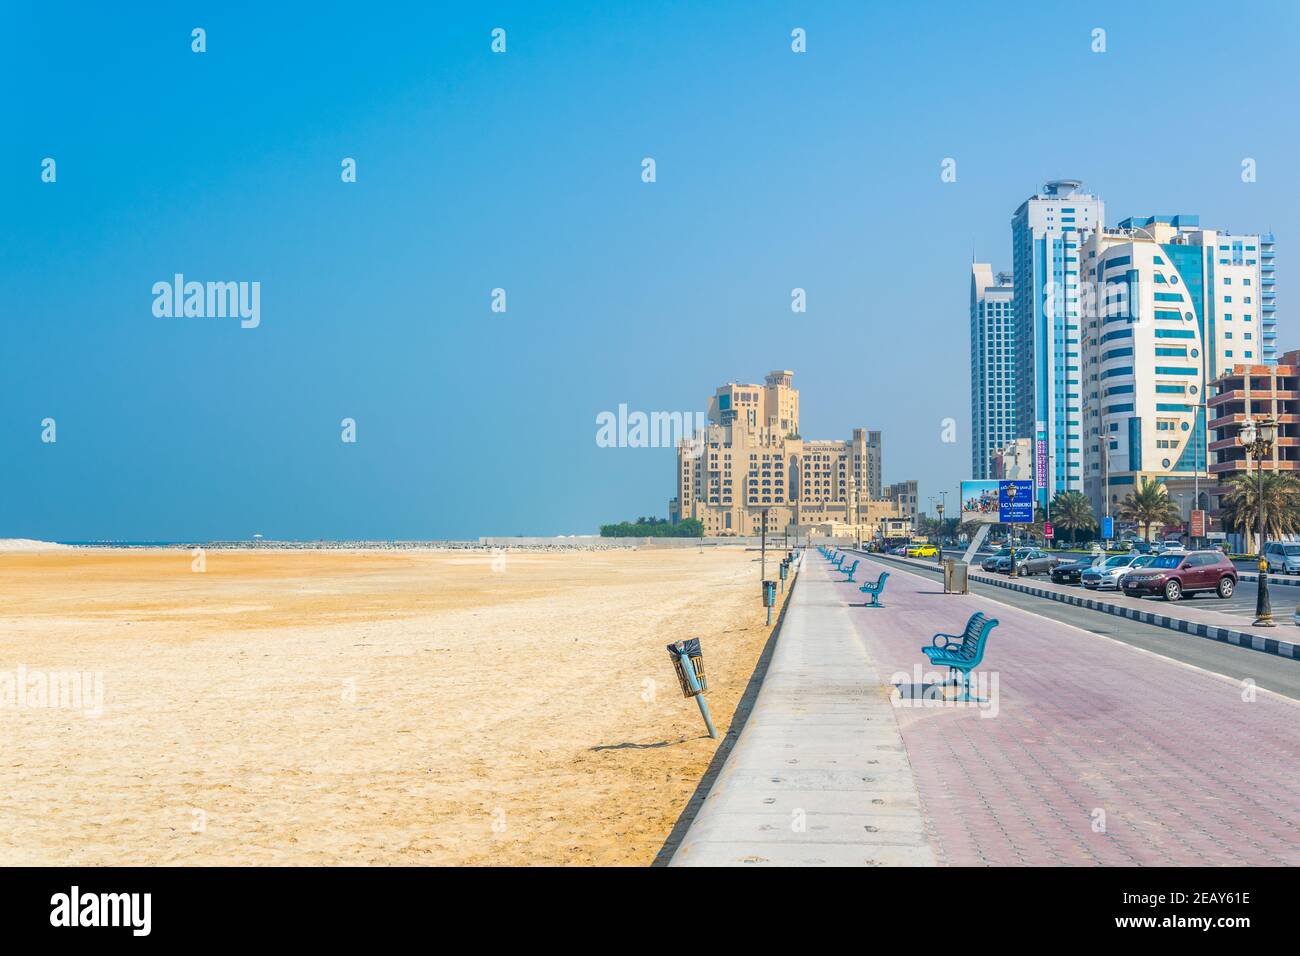 AJMAN, UAE, OCTOBER 24, 2016: Hotels stretched alongside beach in the smallest of the United Arab Emirates - Ajman. Stock Photo